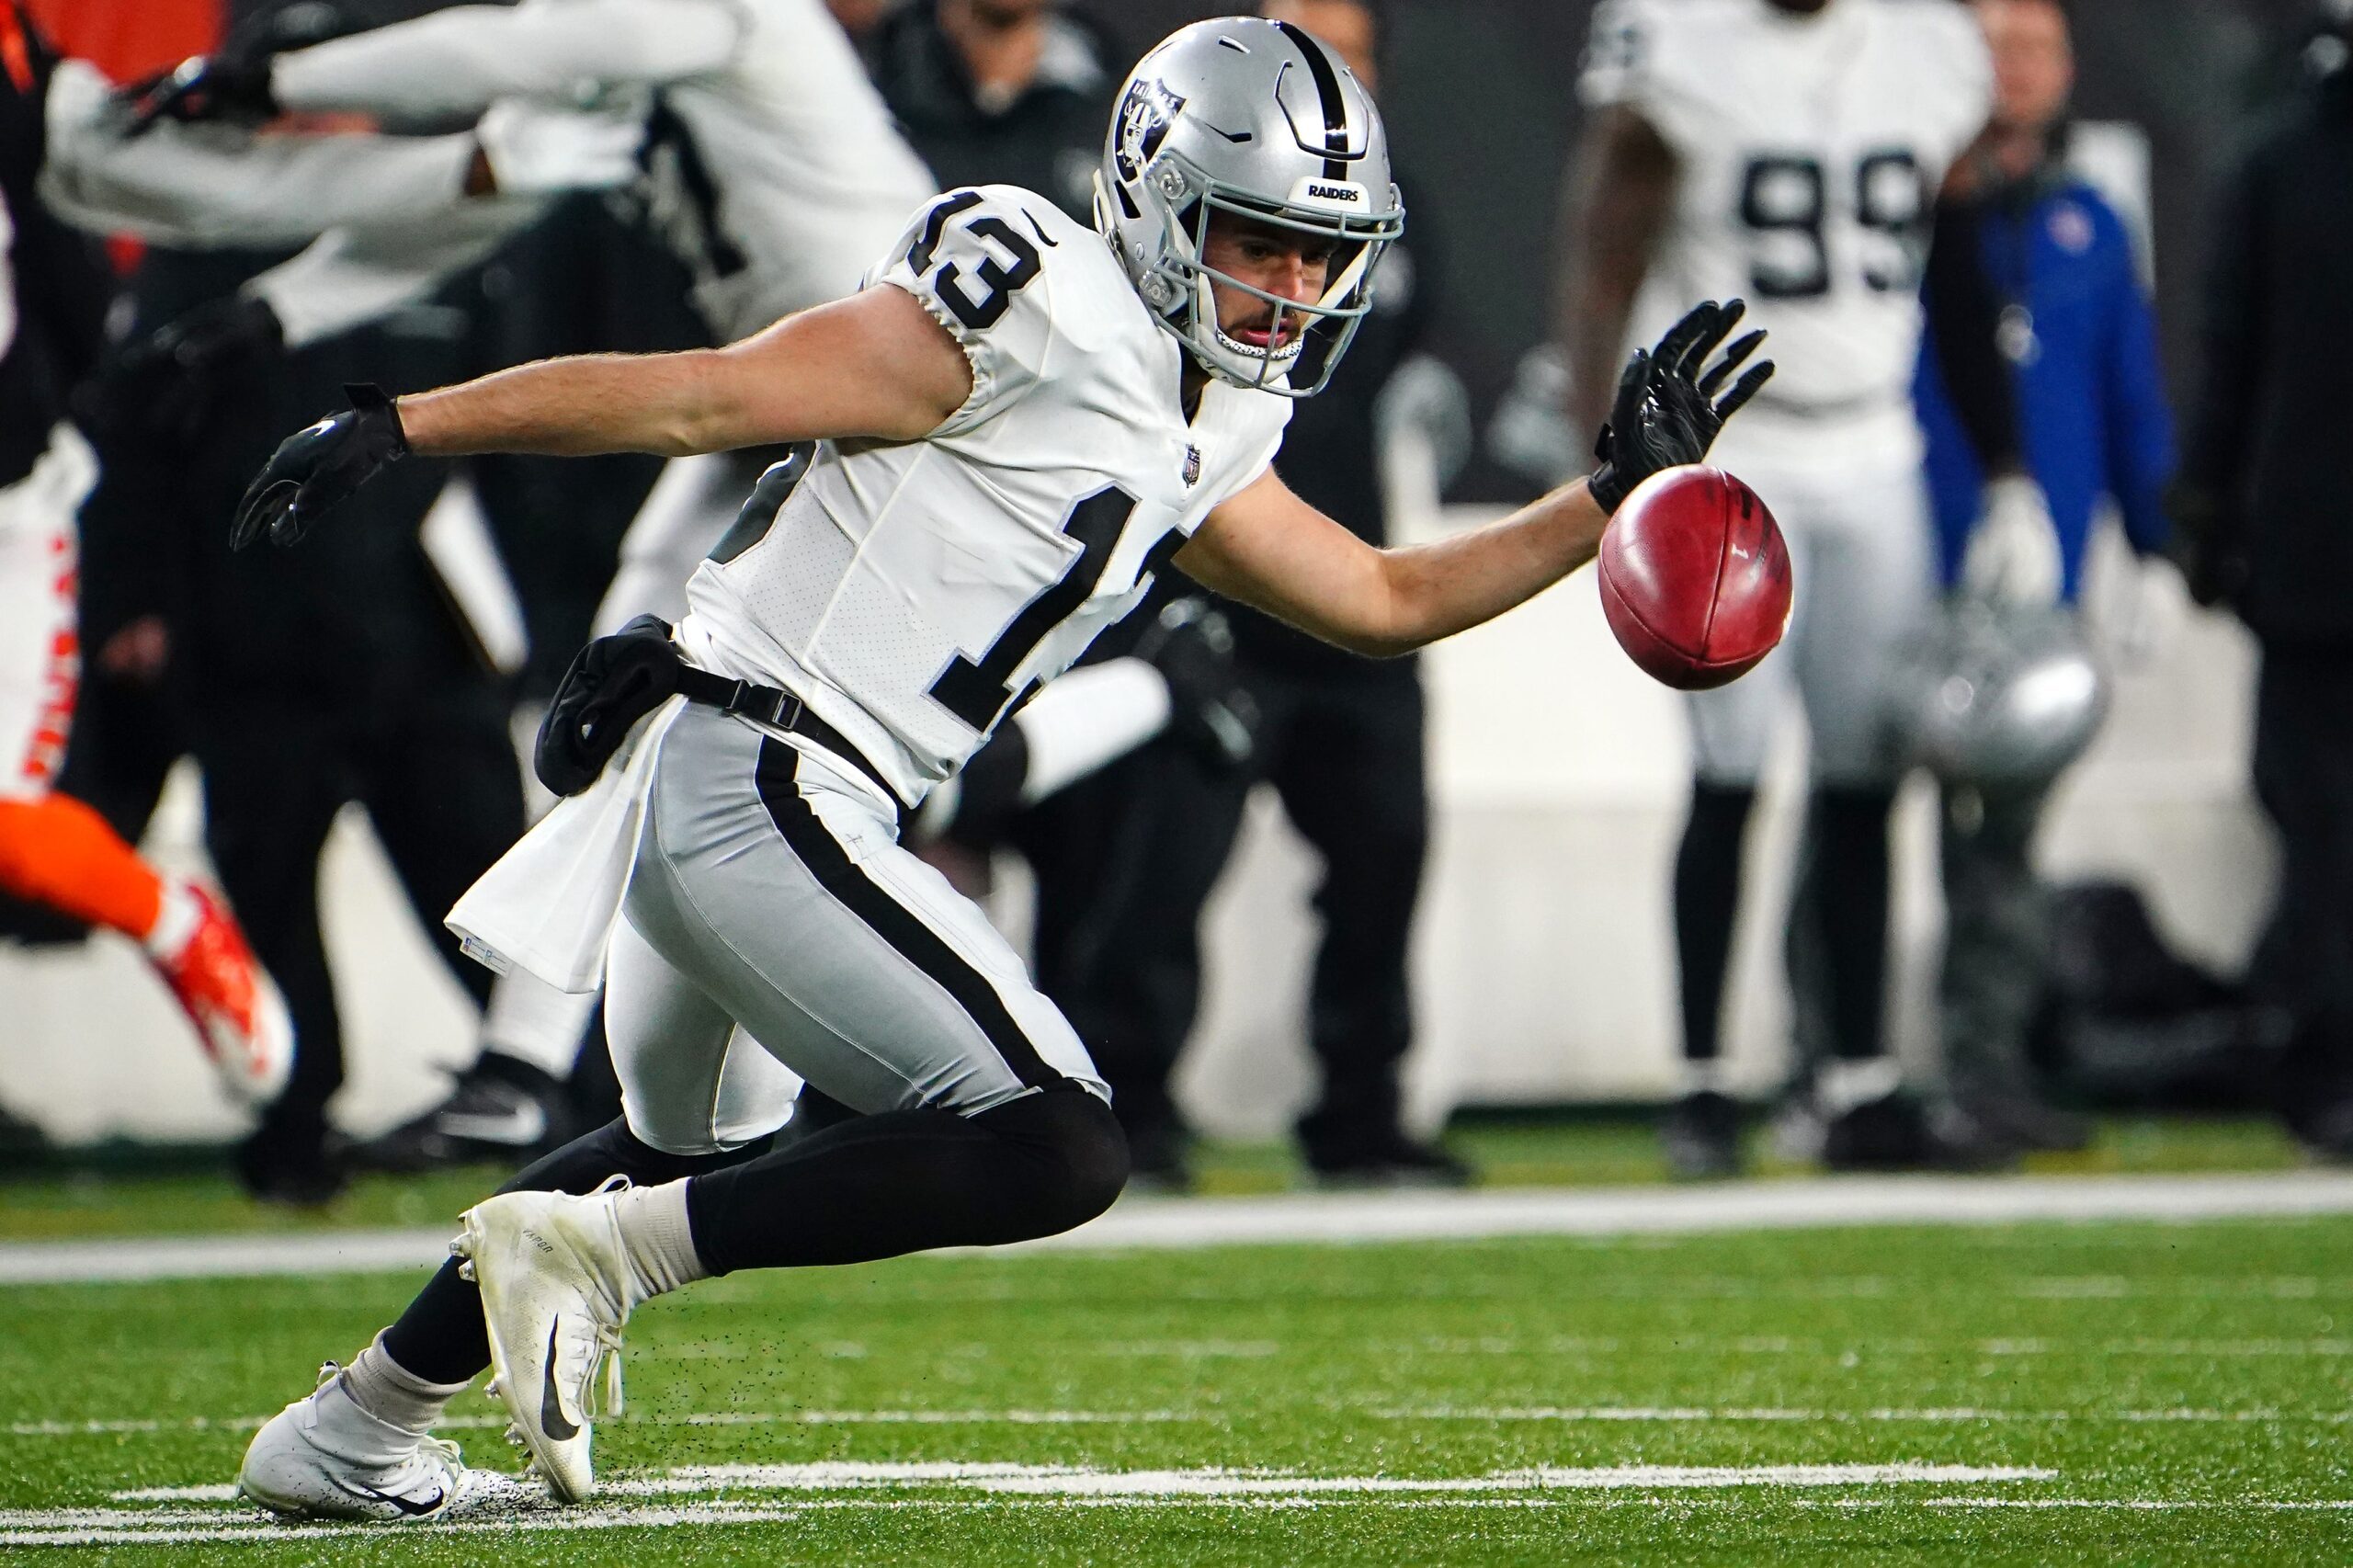 Las Vegas Raiders wide receiver Hunter Renfrow catching the ball